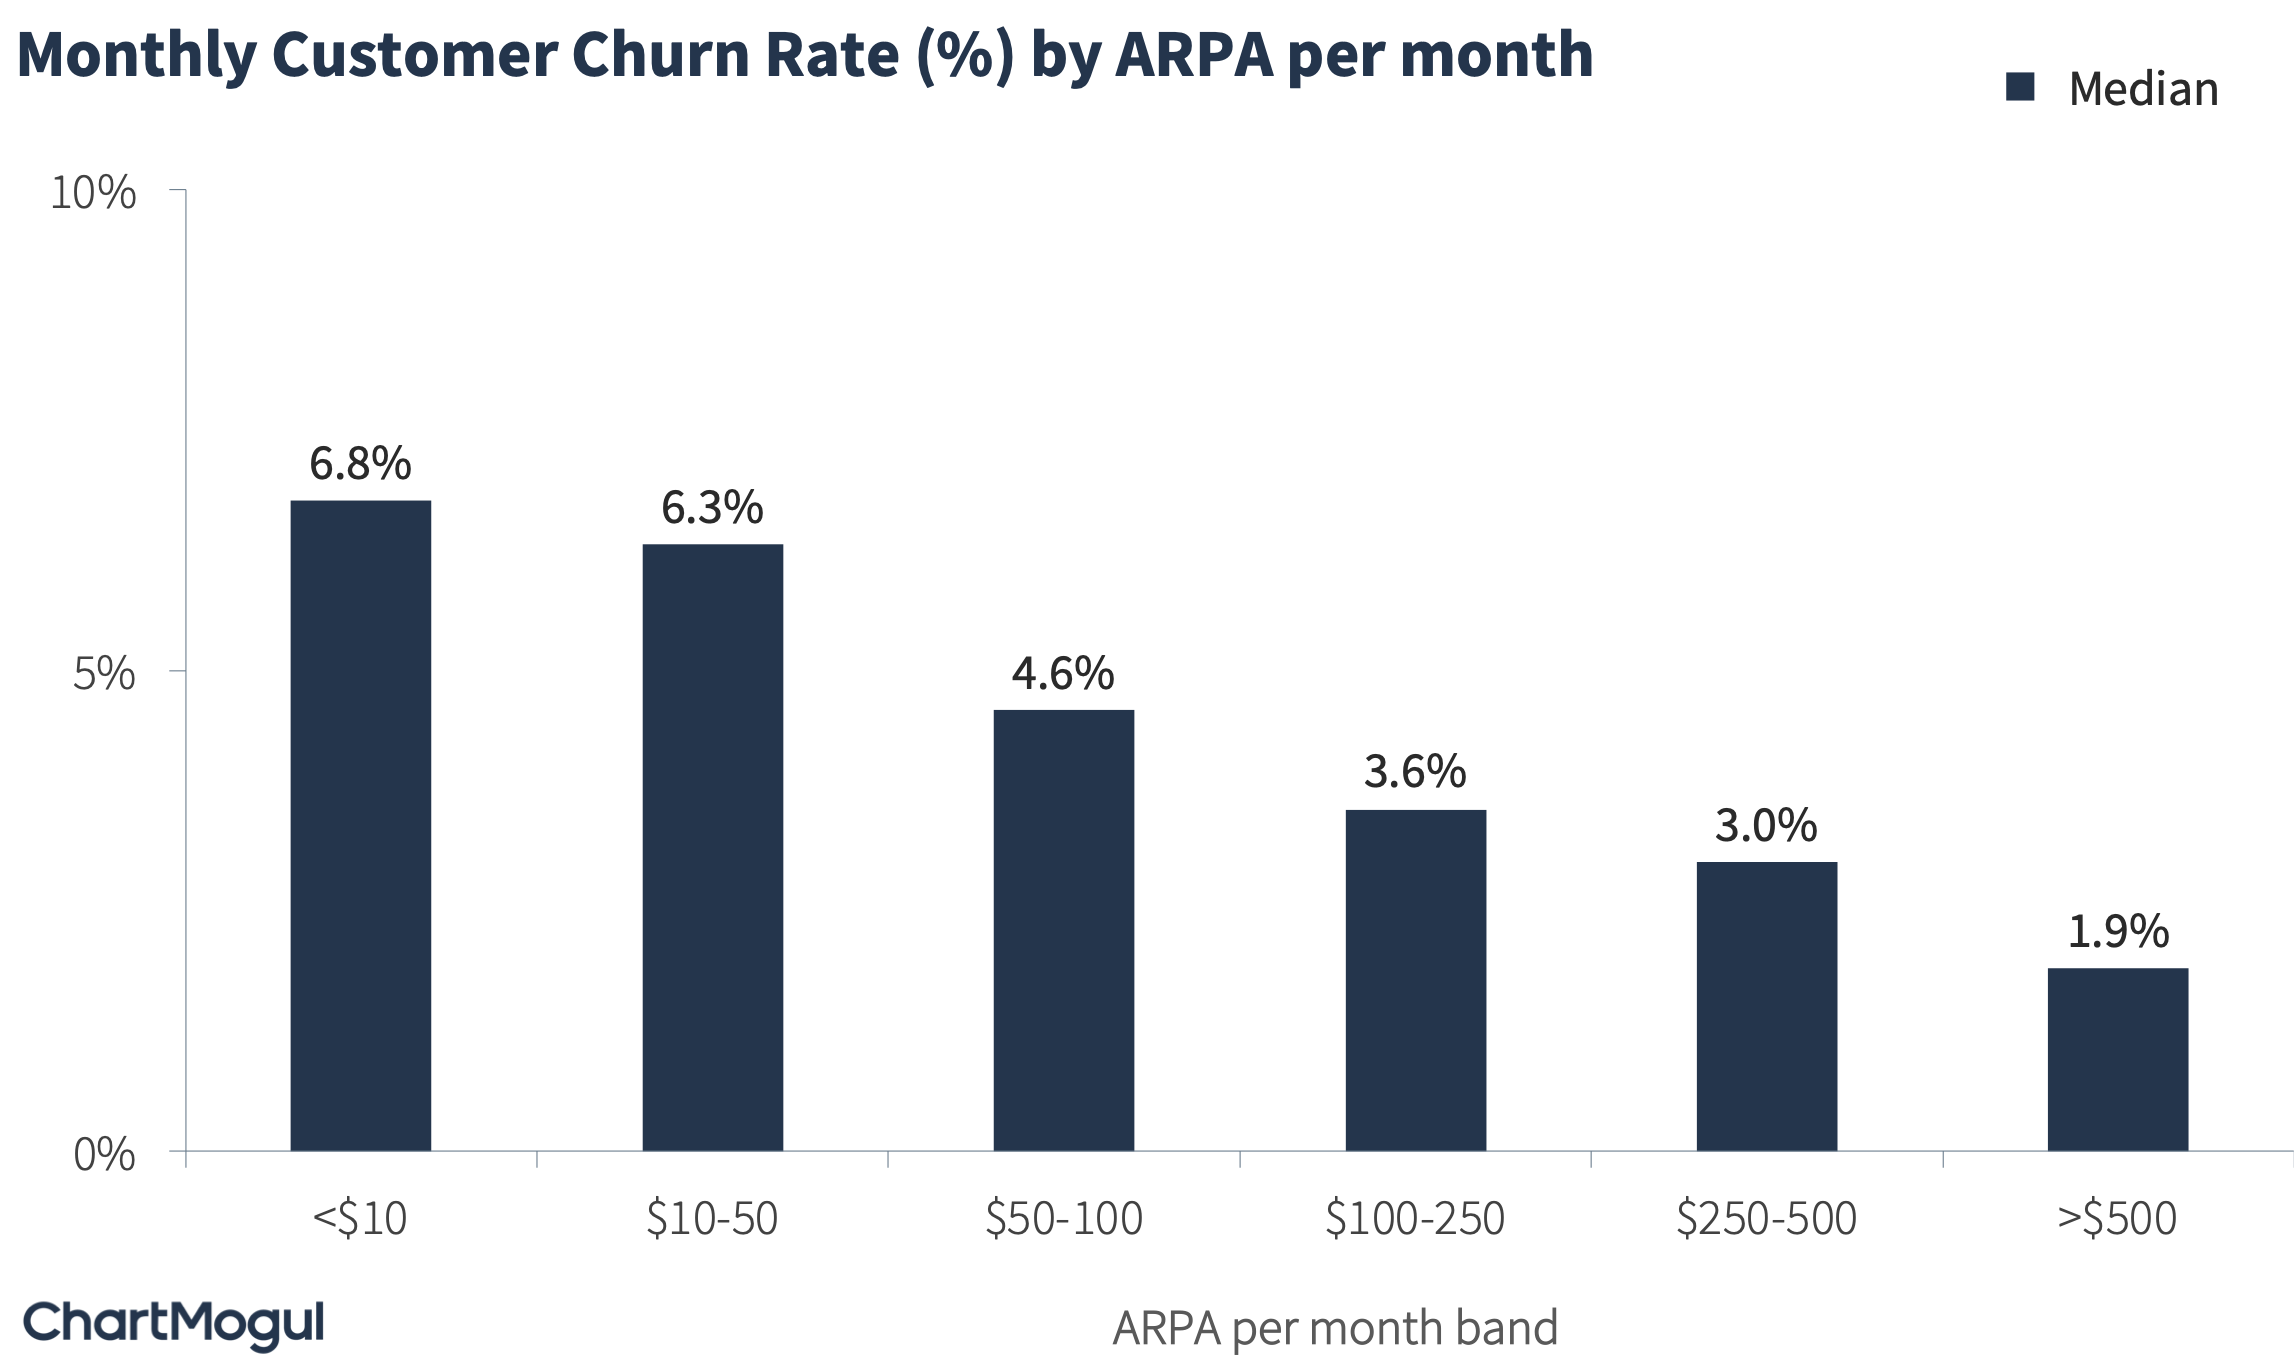 Median Monthly Customer Churn Rate by ARPA per month